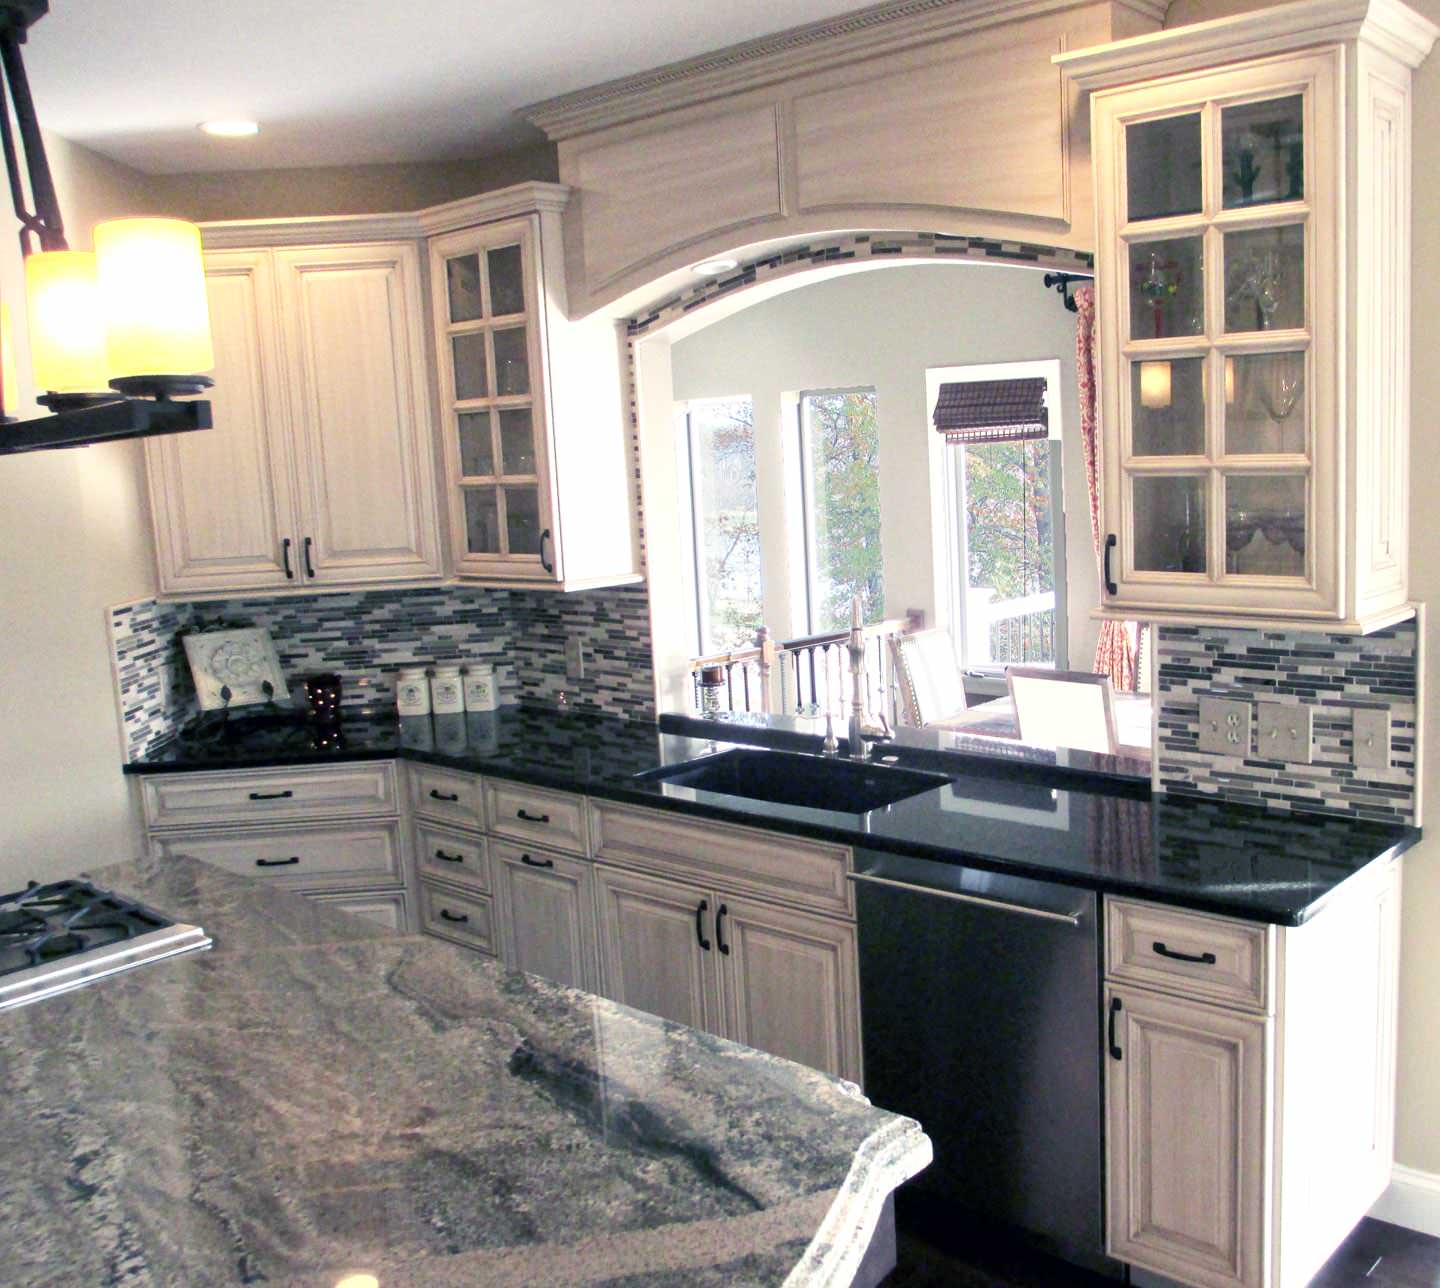 Awesome white kitchen cabinets with gray glaze White Cabinets Gray Glaze Houzz